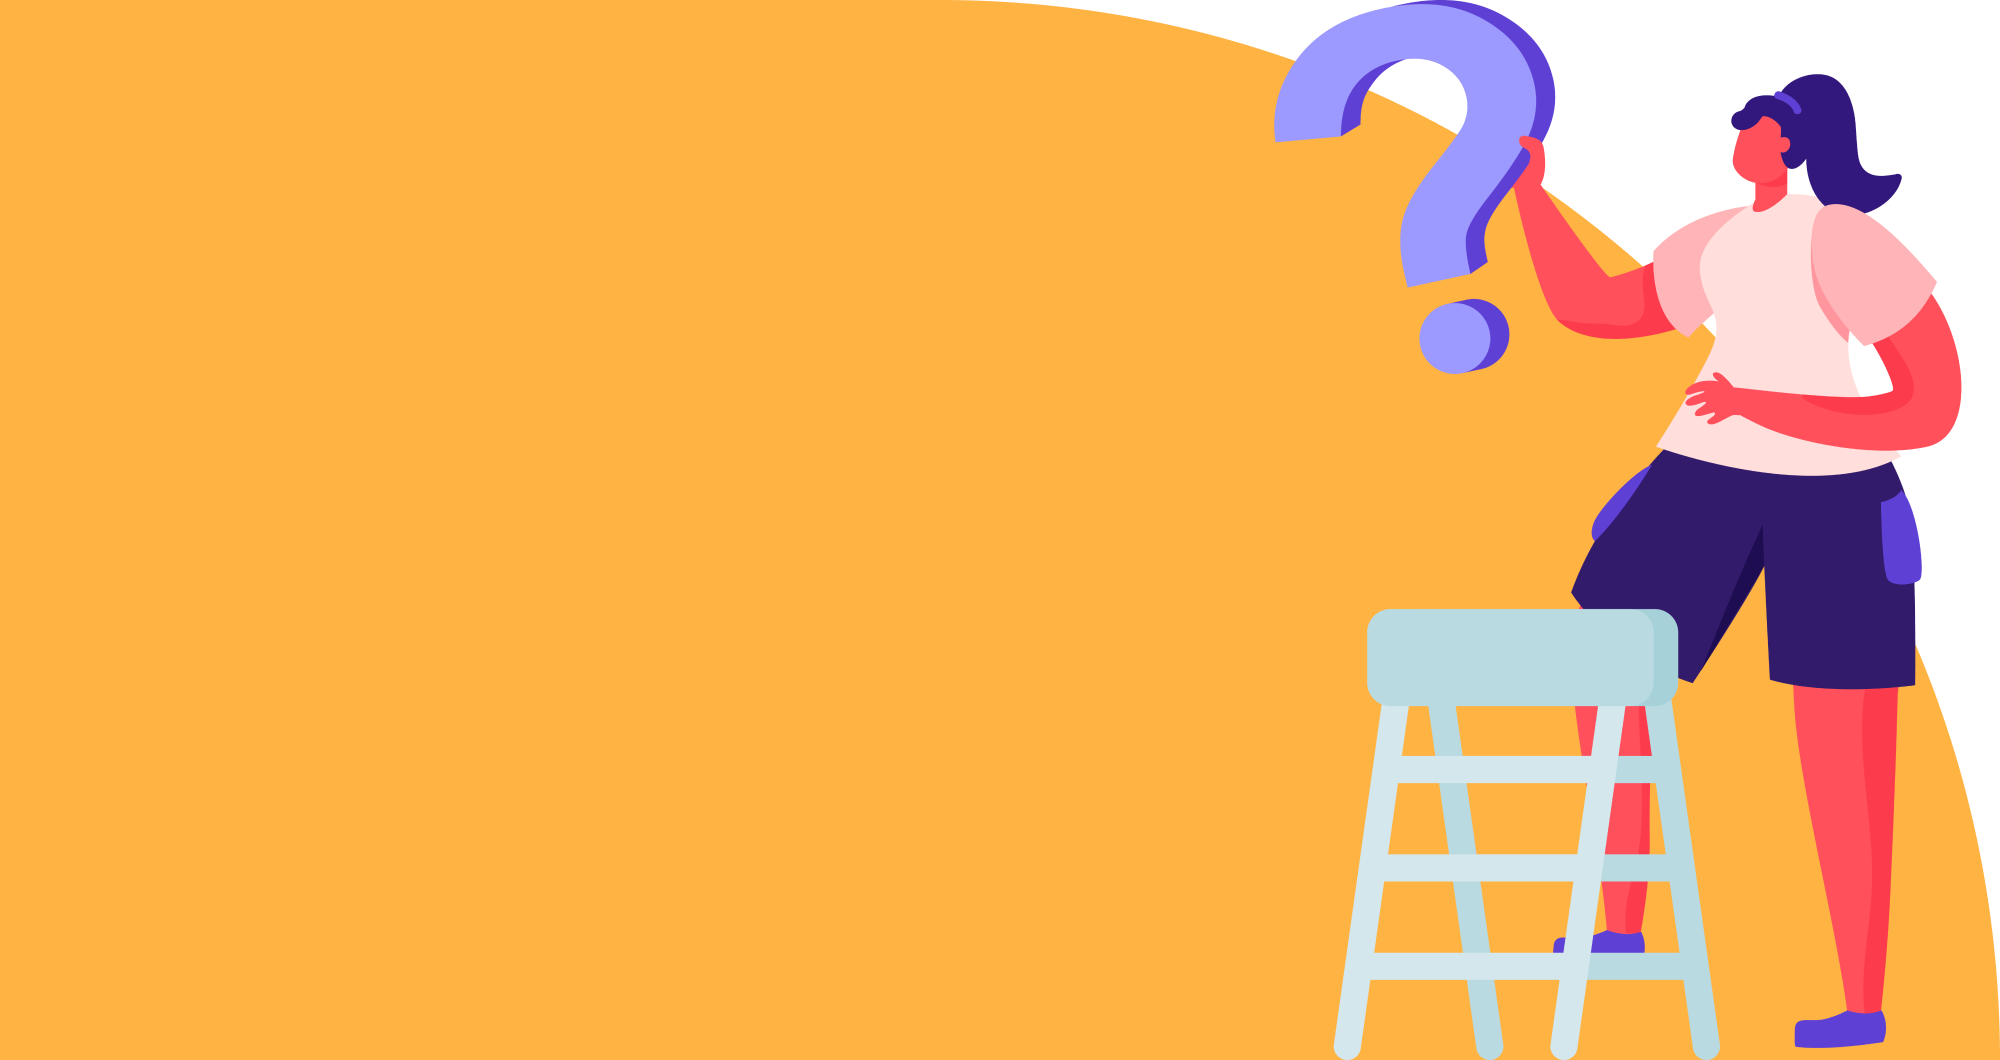 Image of a woman on a step ladder holding a question mark